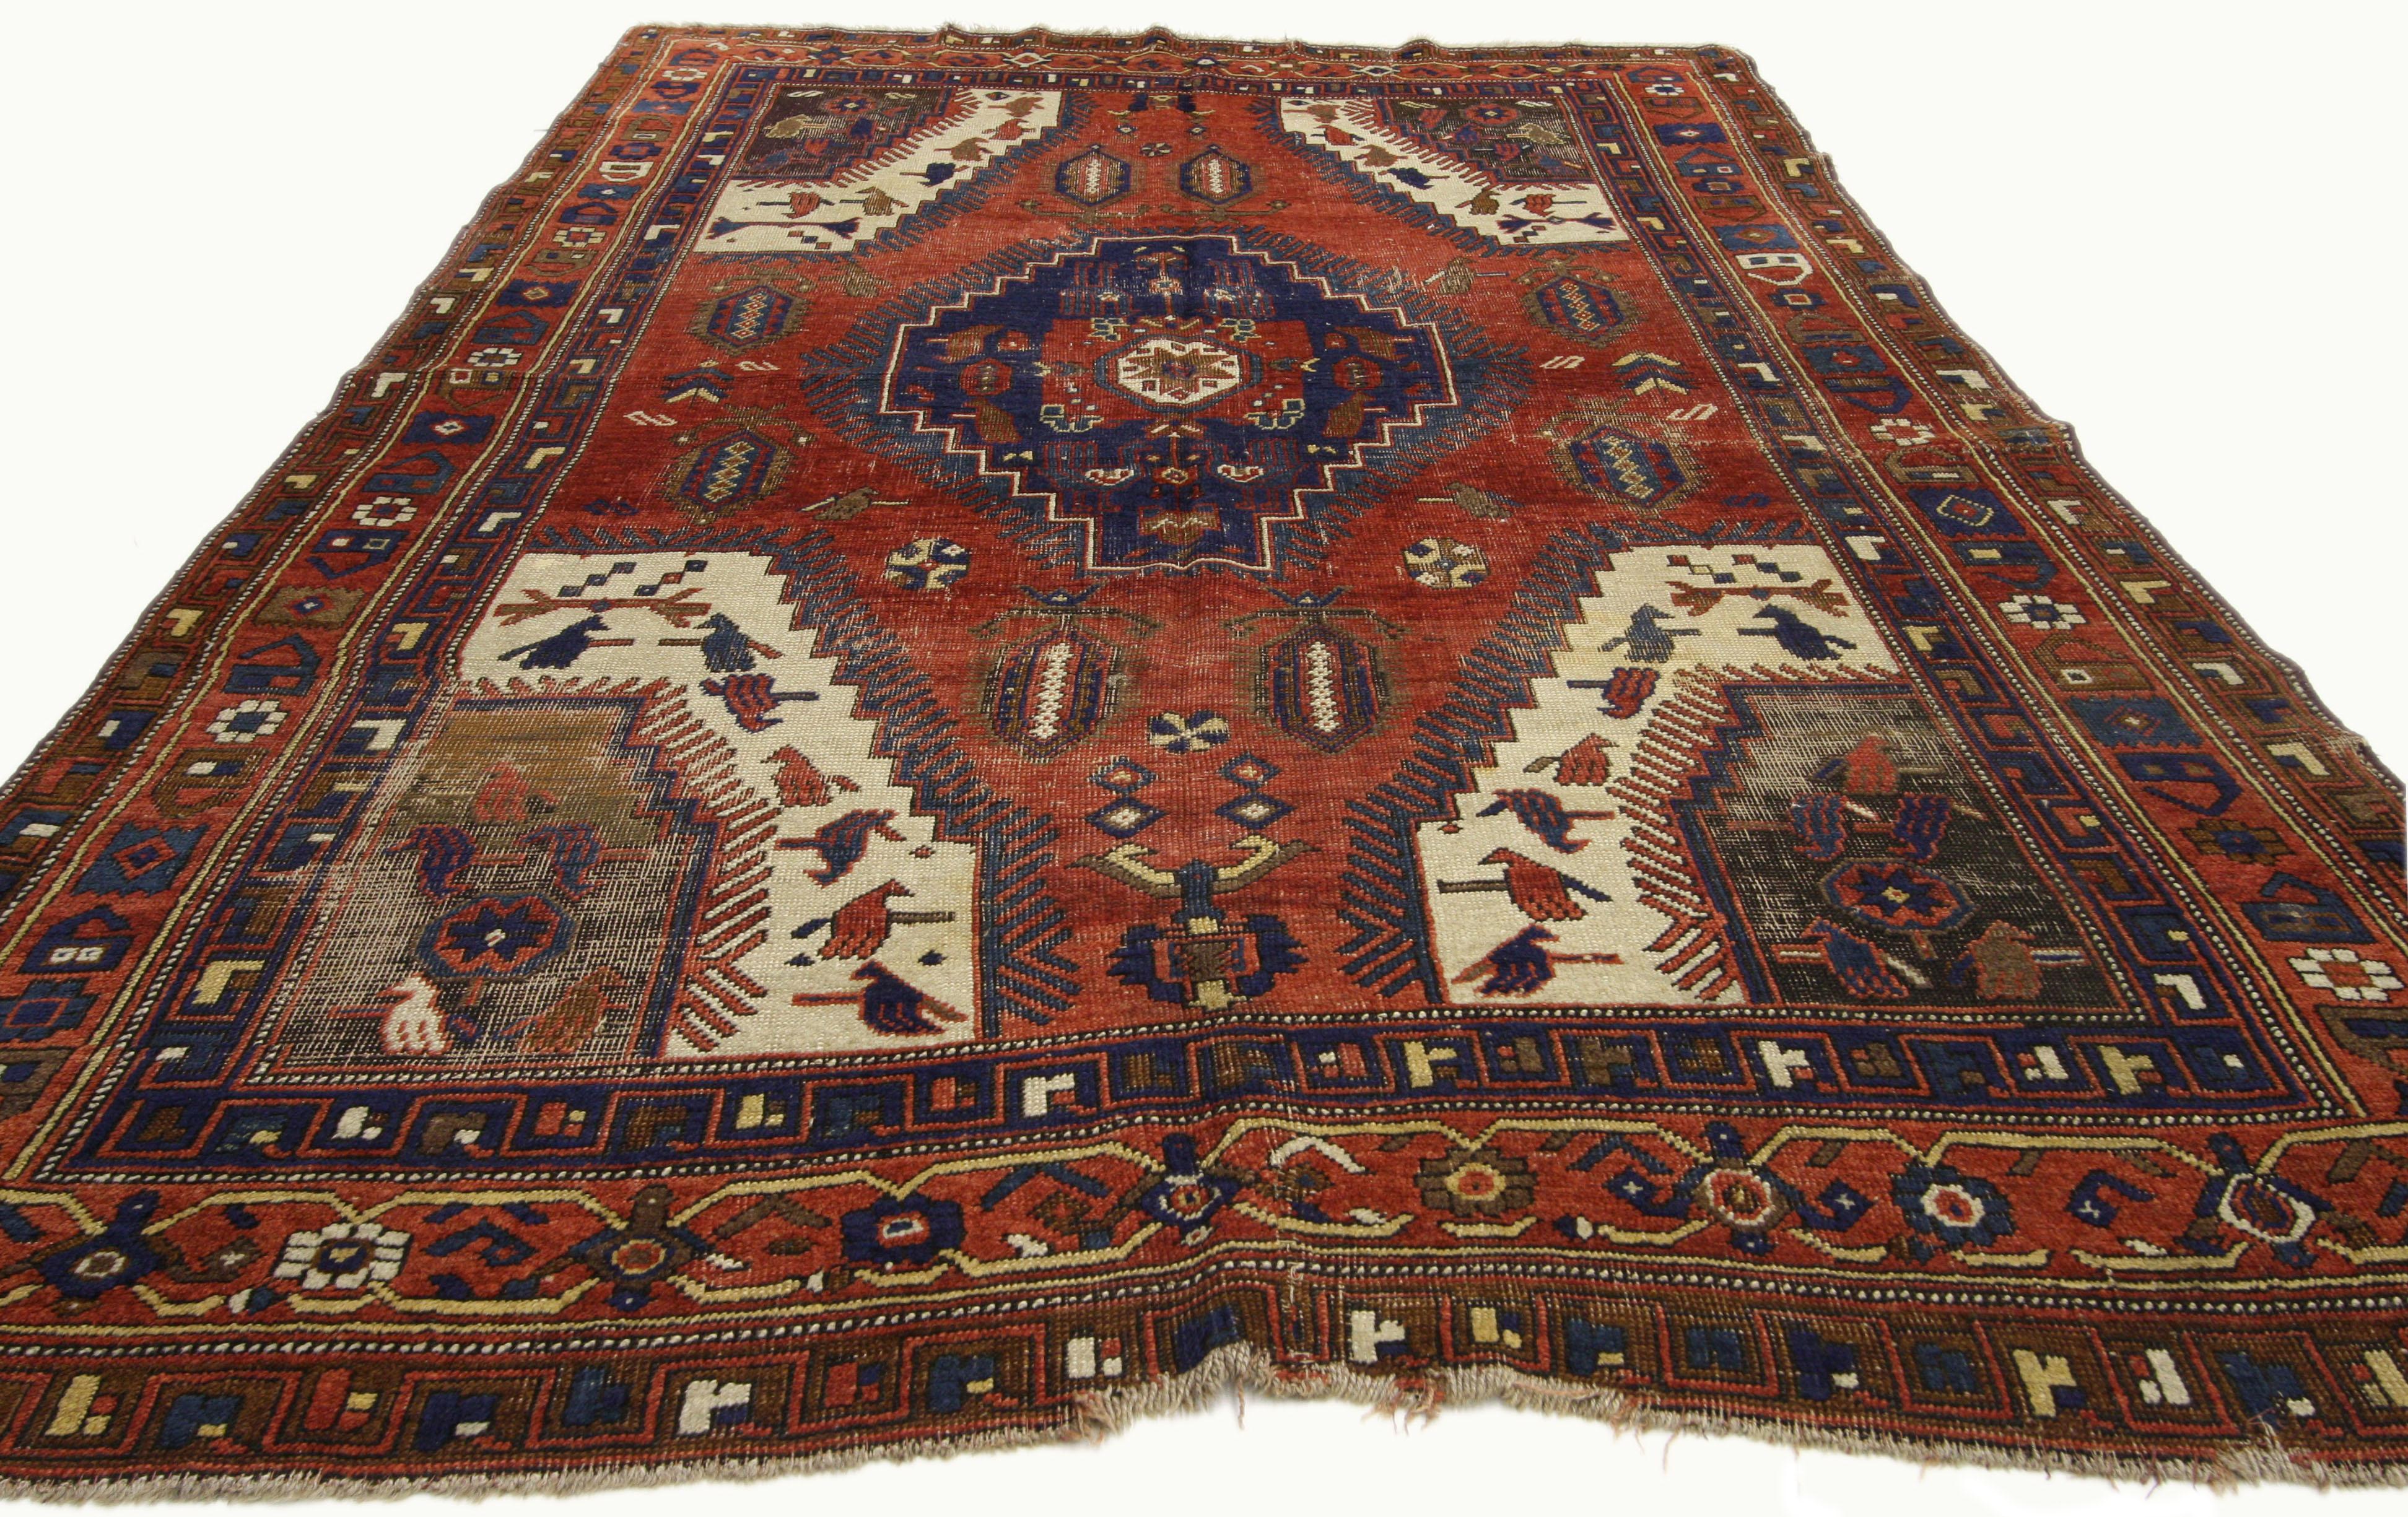 73263 Distressed Antique Turkish Bergama rug with Adirondack Style 05'03 x 08'02. This hand knotted wool antique Turkish Bergama rug with Adirondack Style displays a distressed composition with a rich and rustic design aesthetic. Set with a large